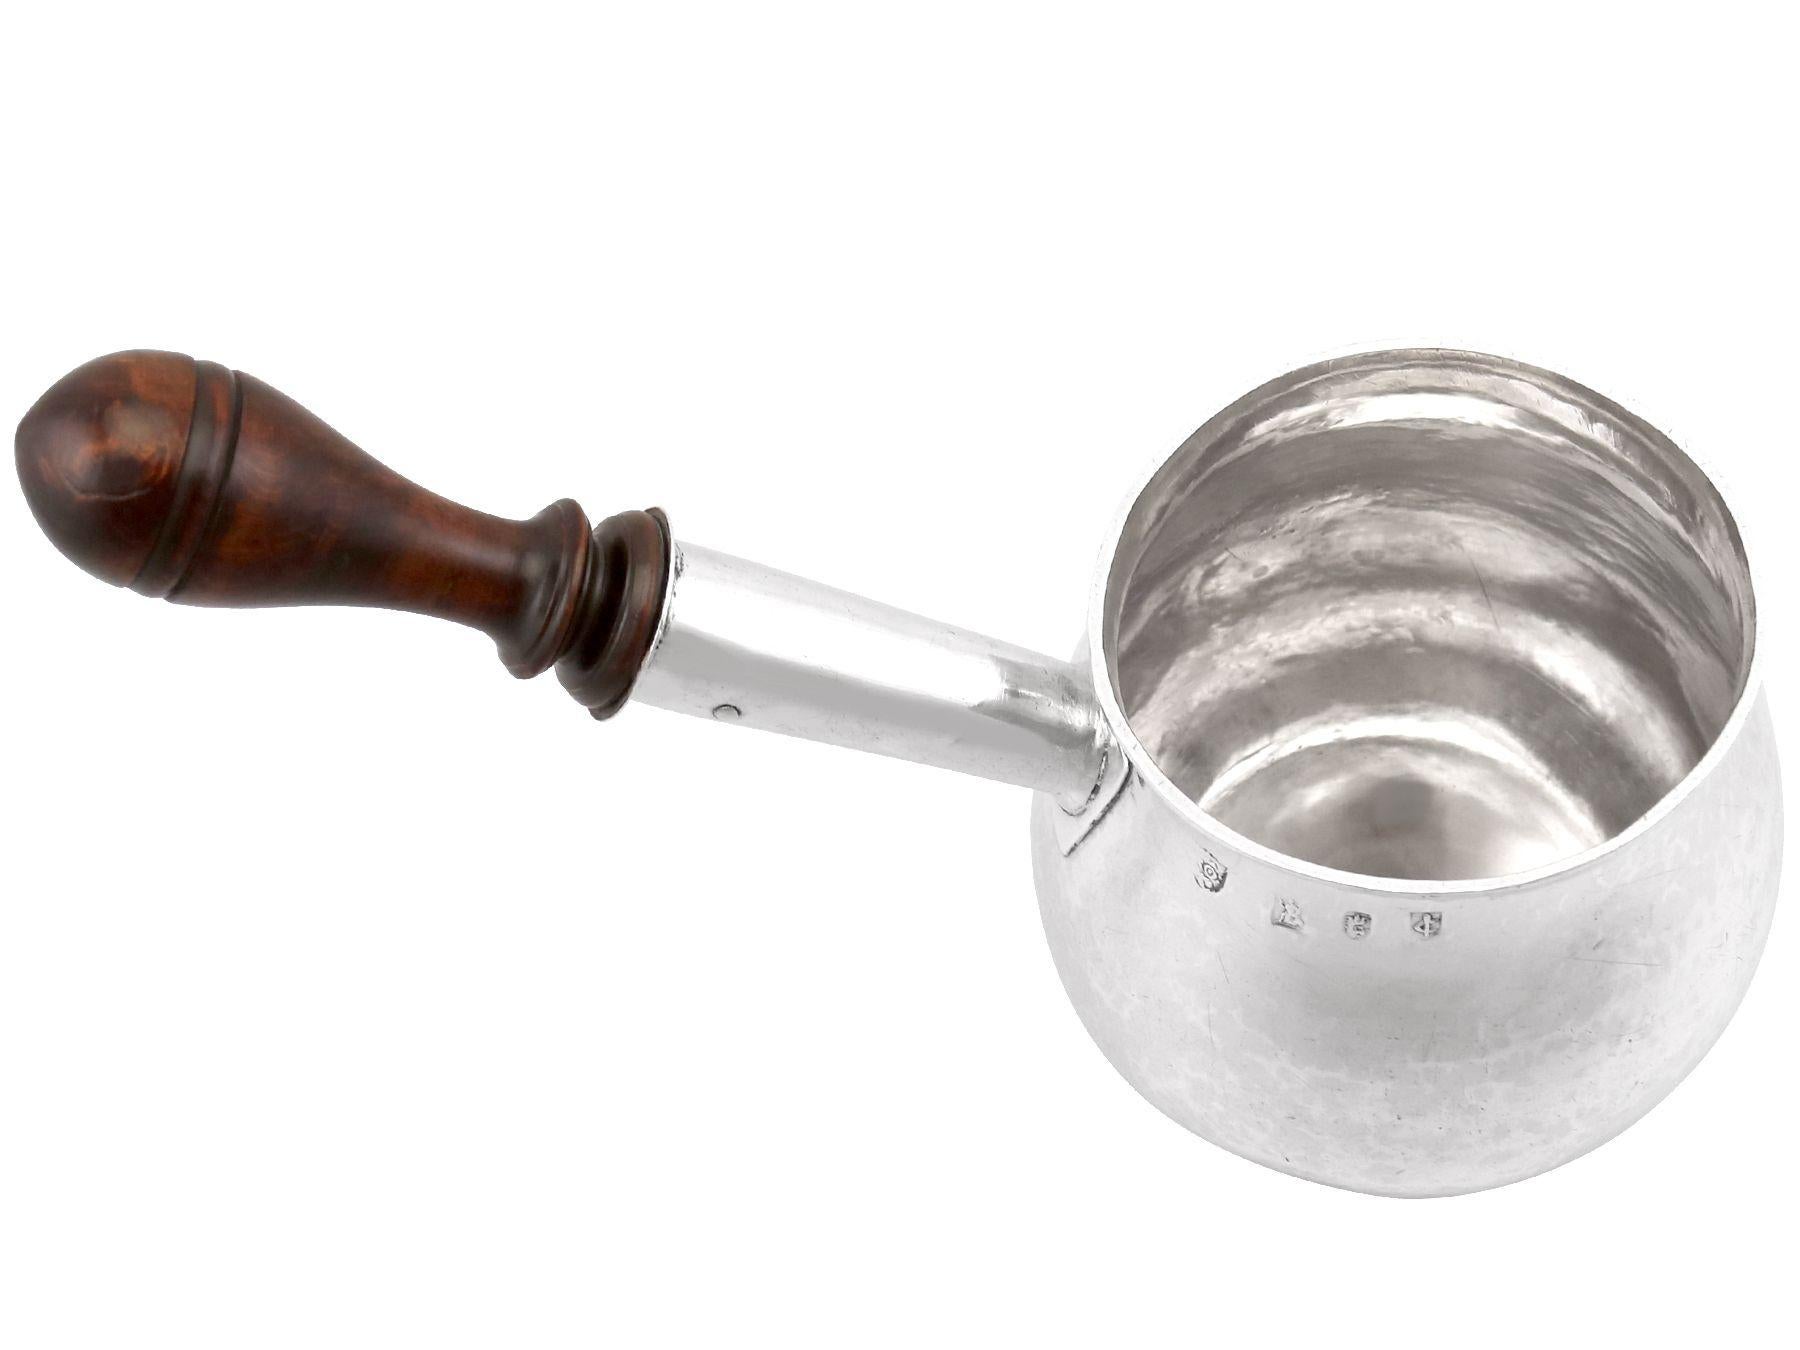 An exceptional, fine antique William III English Britannia standard silver brandy pan; an addition to our collection of 17th century silverware.

This exceptional antique William III Britannia standard* silver brandy pan has a plain circular